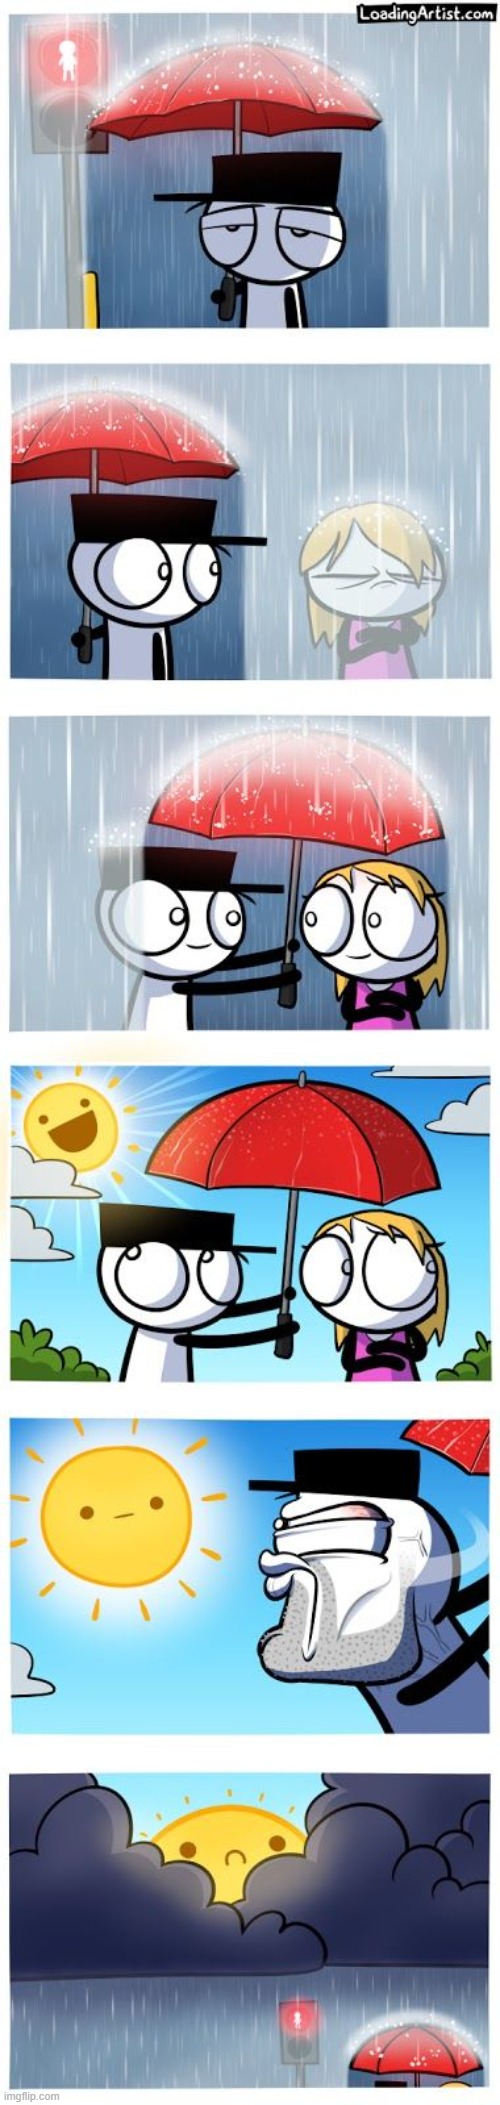 Nobody changes the weather on Gregor! | image tagged in rain,umbrella,sunshine | made w/ Imgflip meme maker